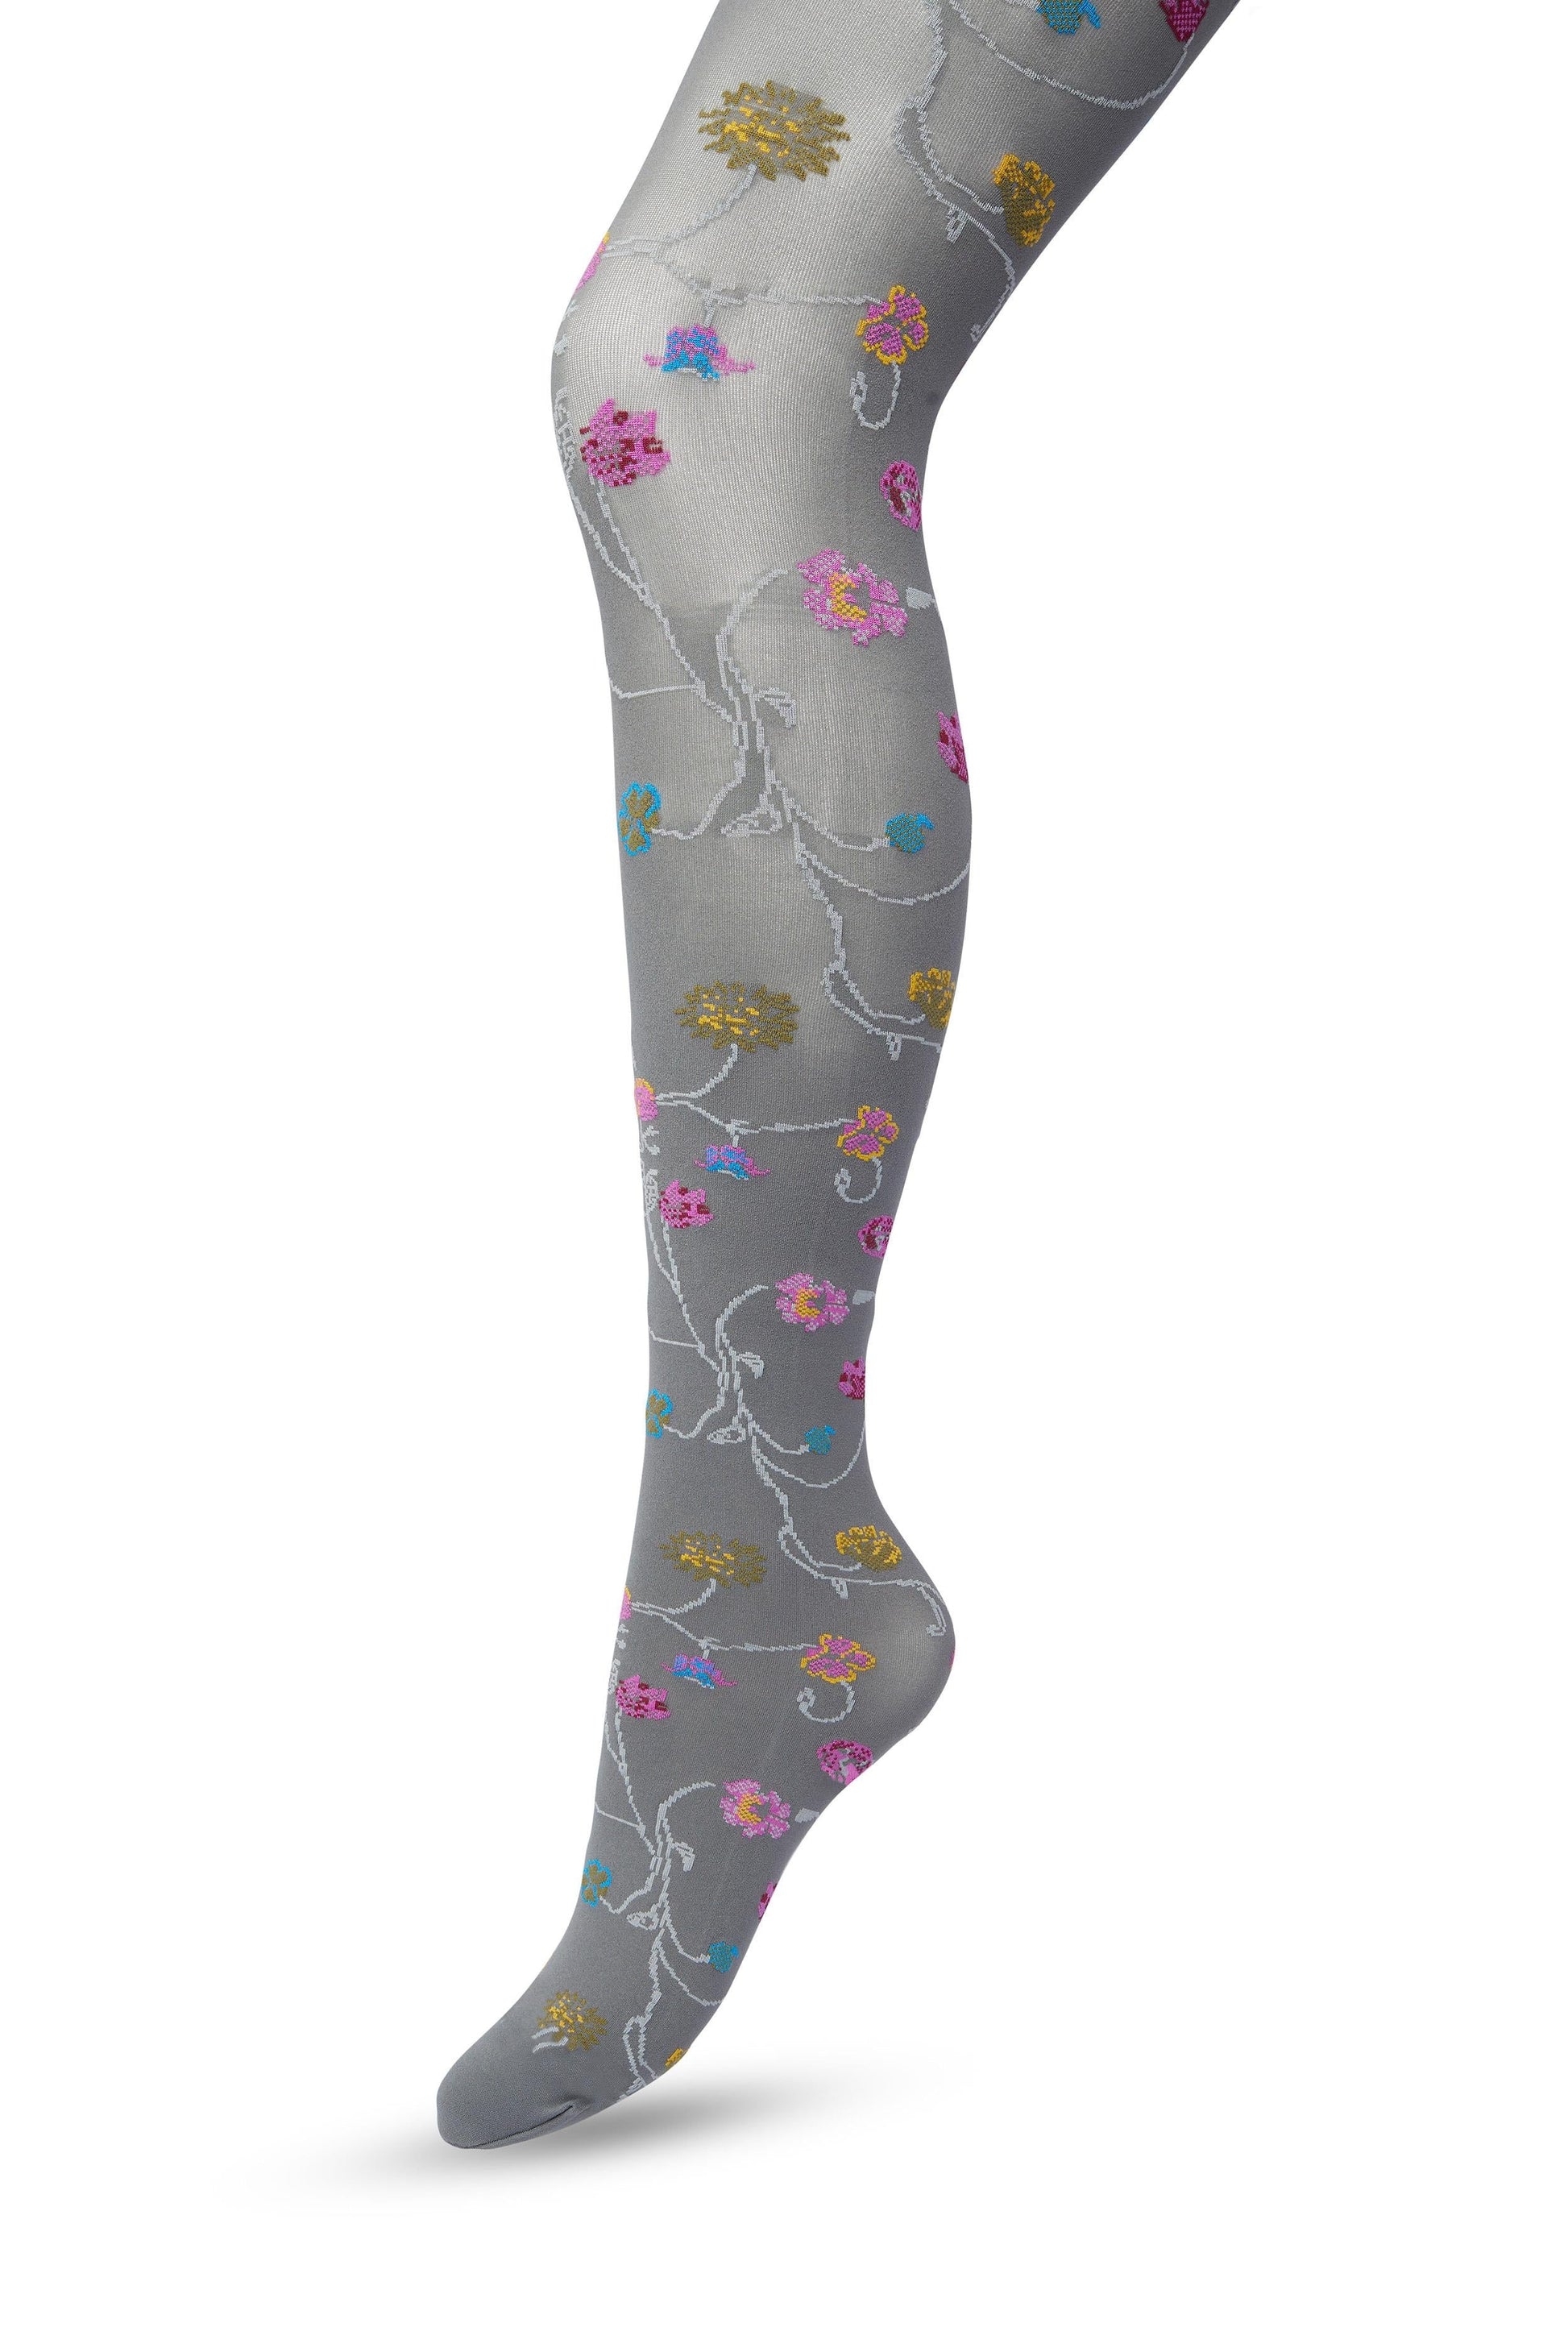 Bonnie Doon Floral Tights - Light grey opaque fashion tights with a multicoloured woven floral pattern